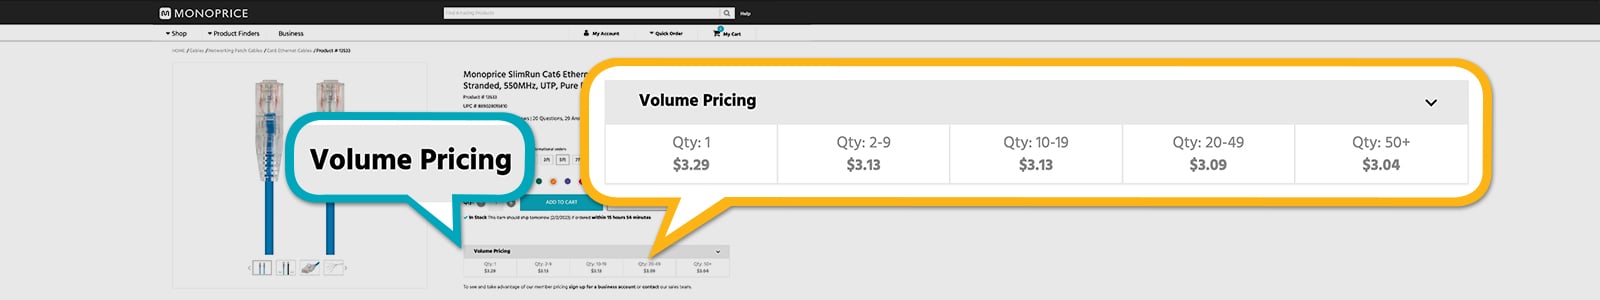 Full Volume Pricing Product Page